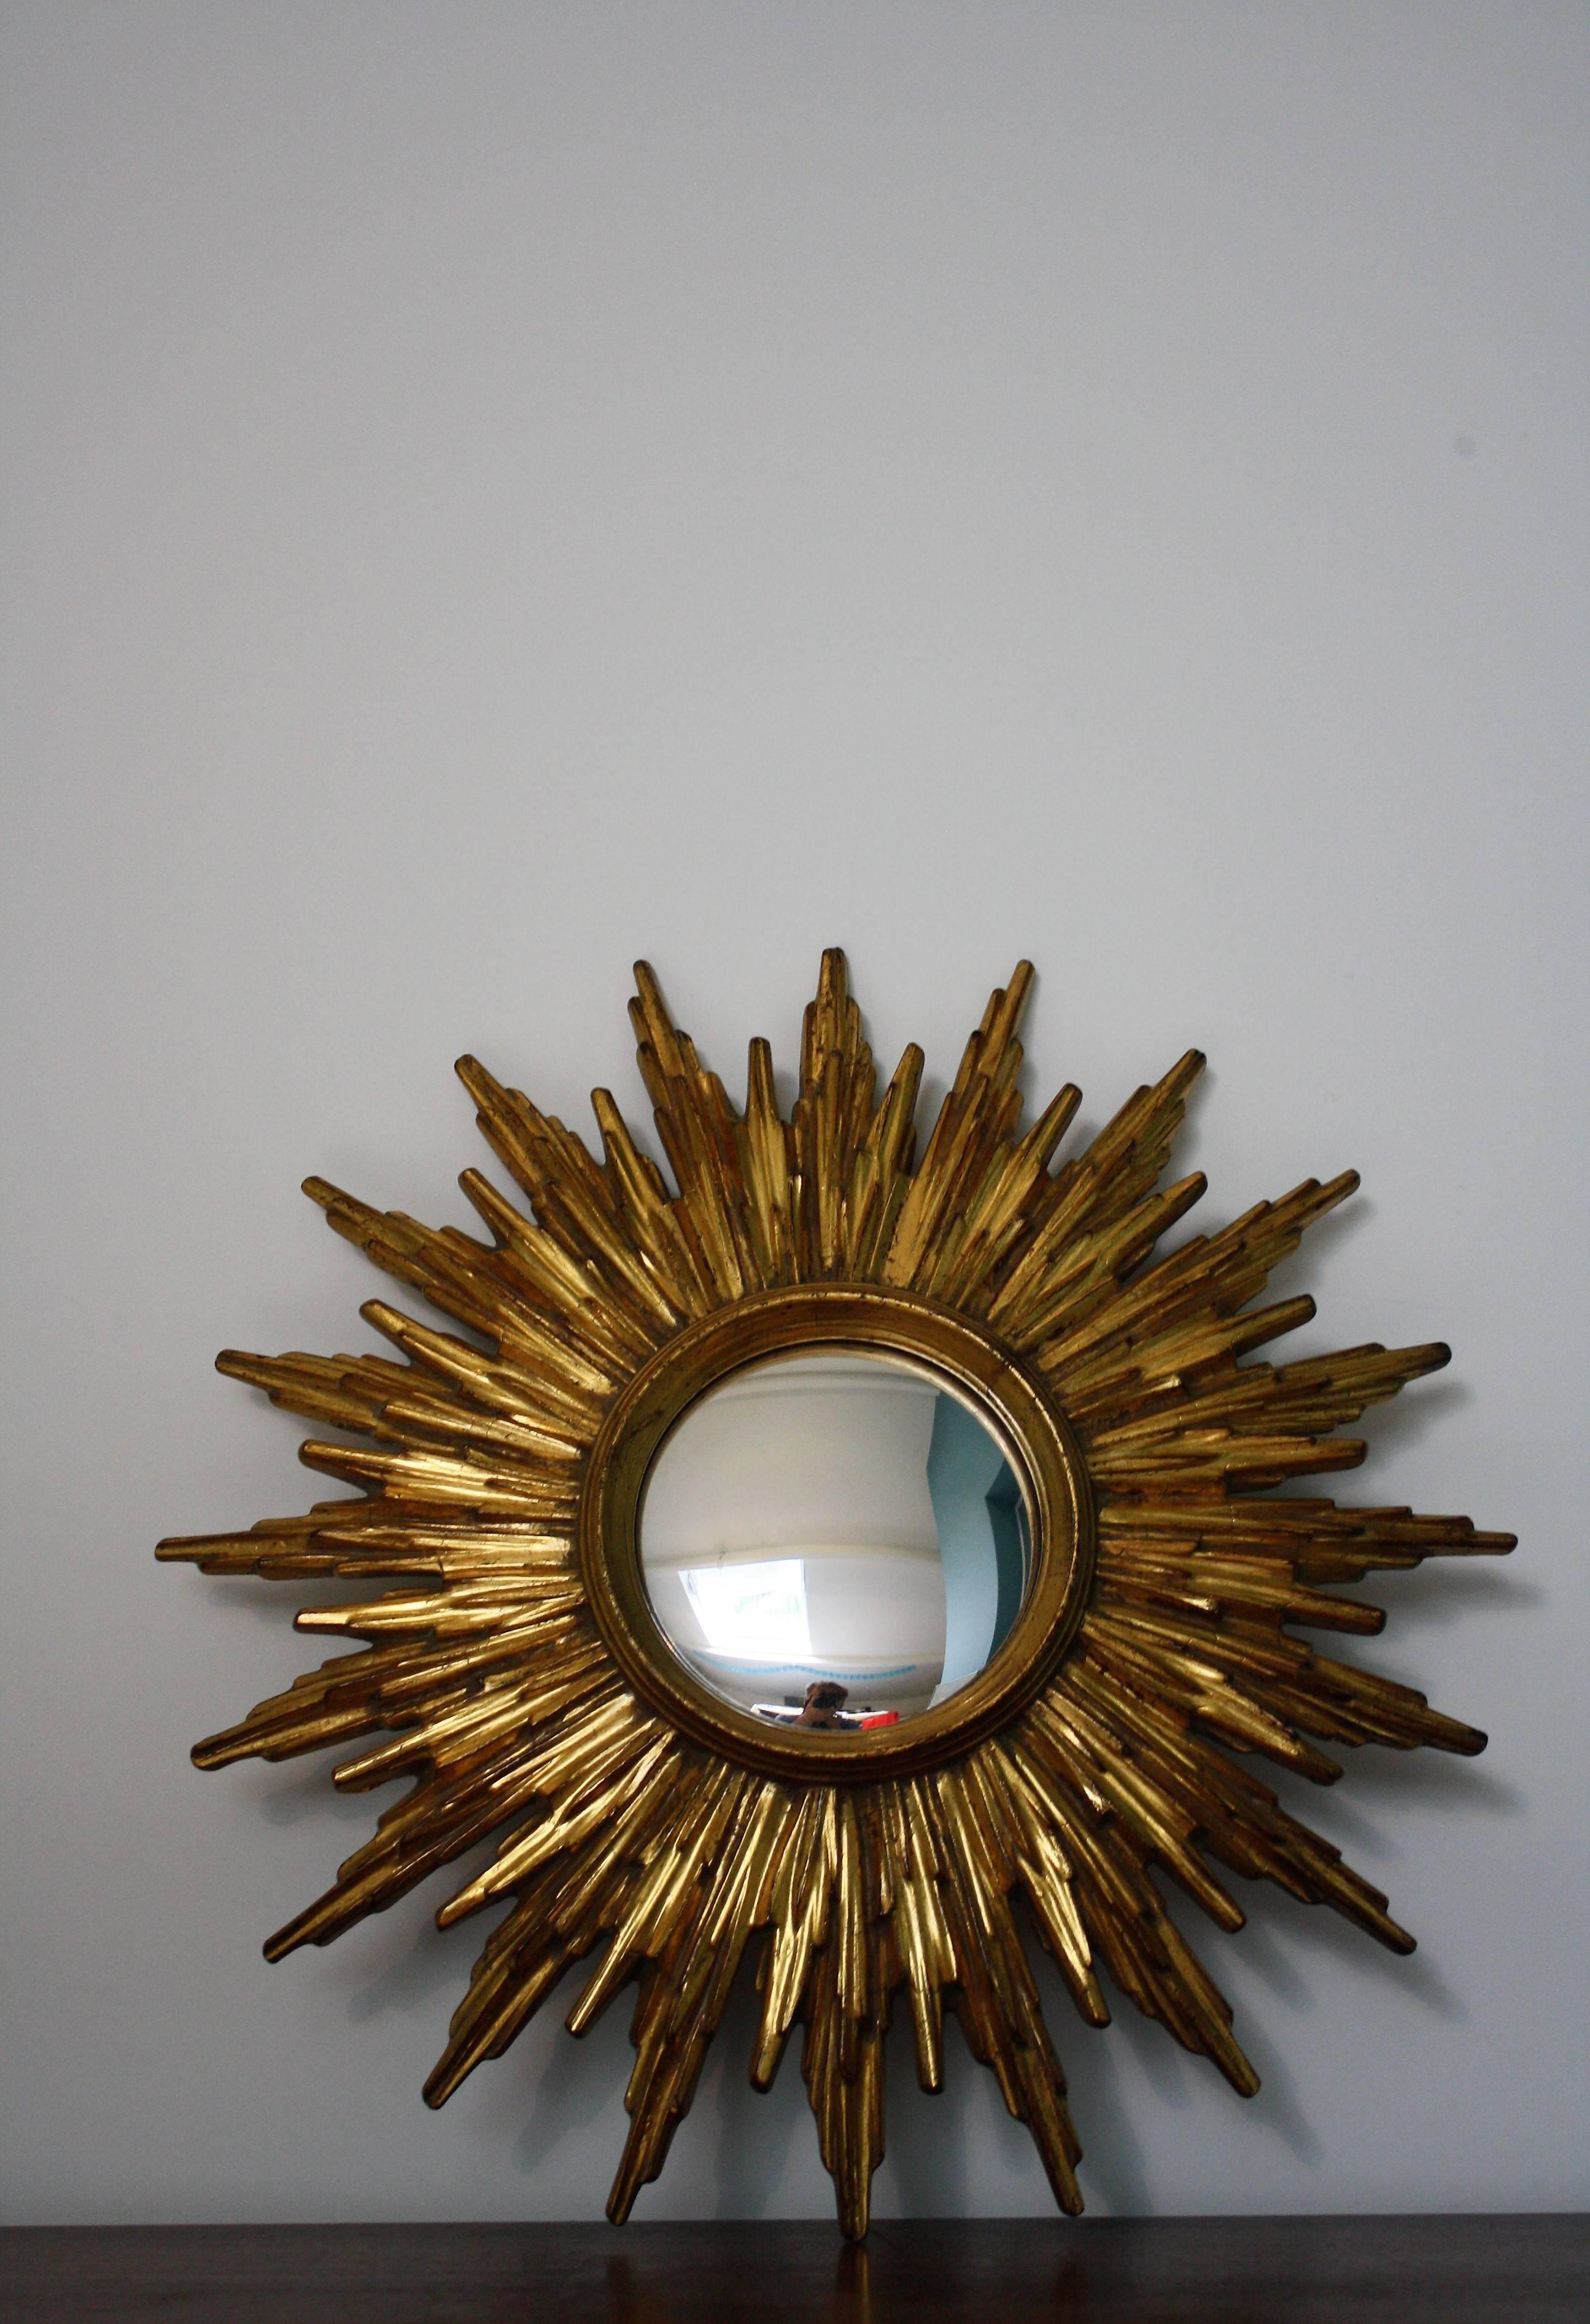 Gilded resin sunburst mirror with convex mirror.

The golden mirror is in a very good condition.

1960s, made in Belgium

Measure: Diameter 37cm/15